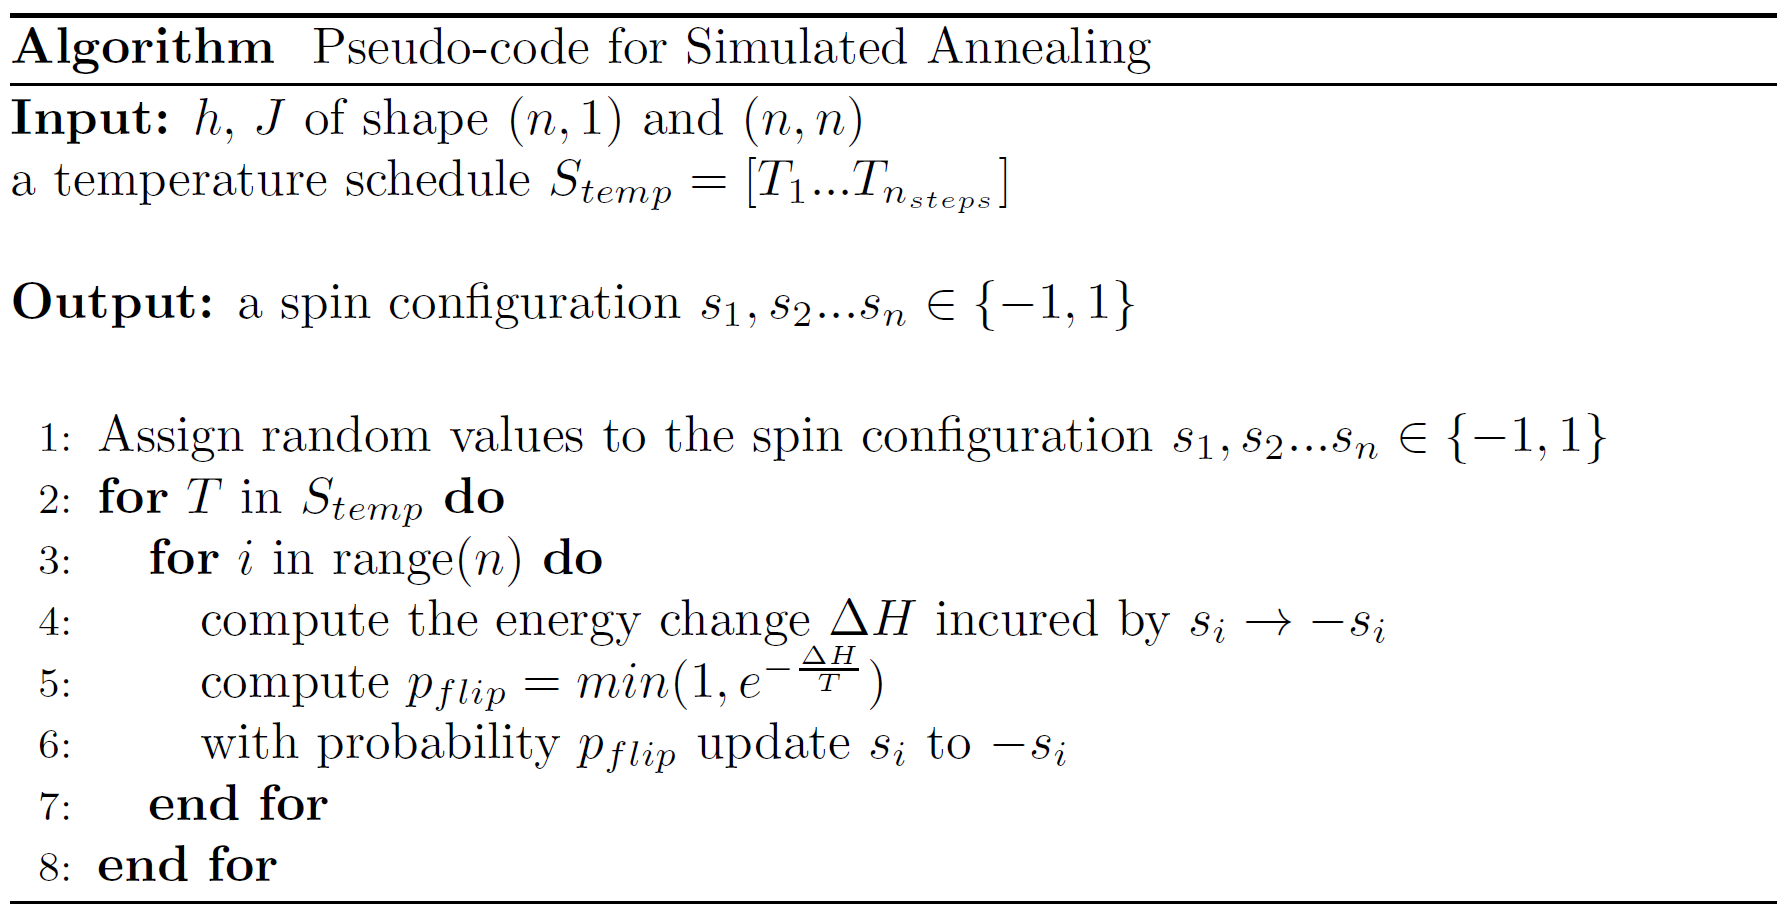 images/simulated_annealing_algoritm_latex.png